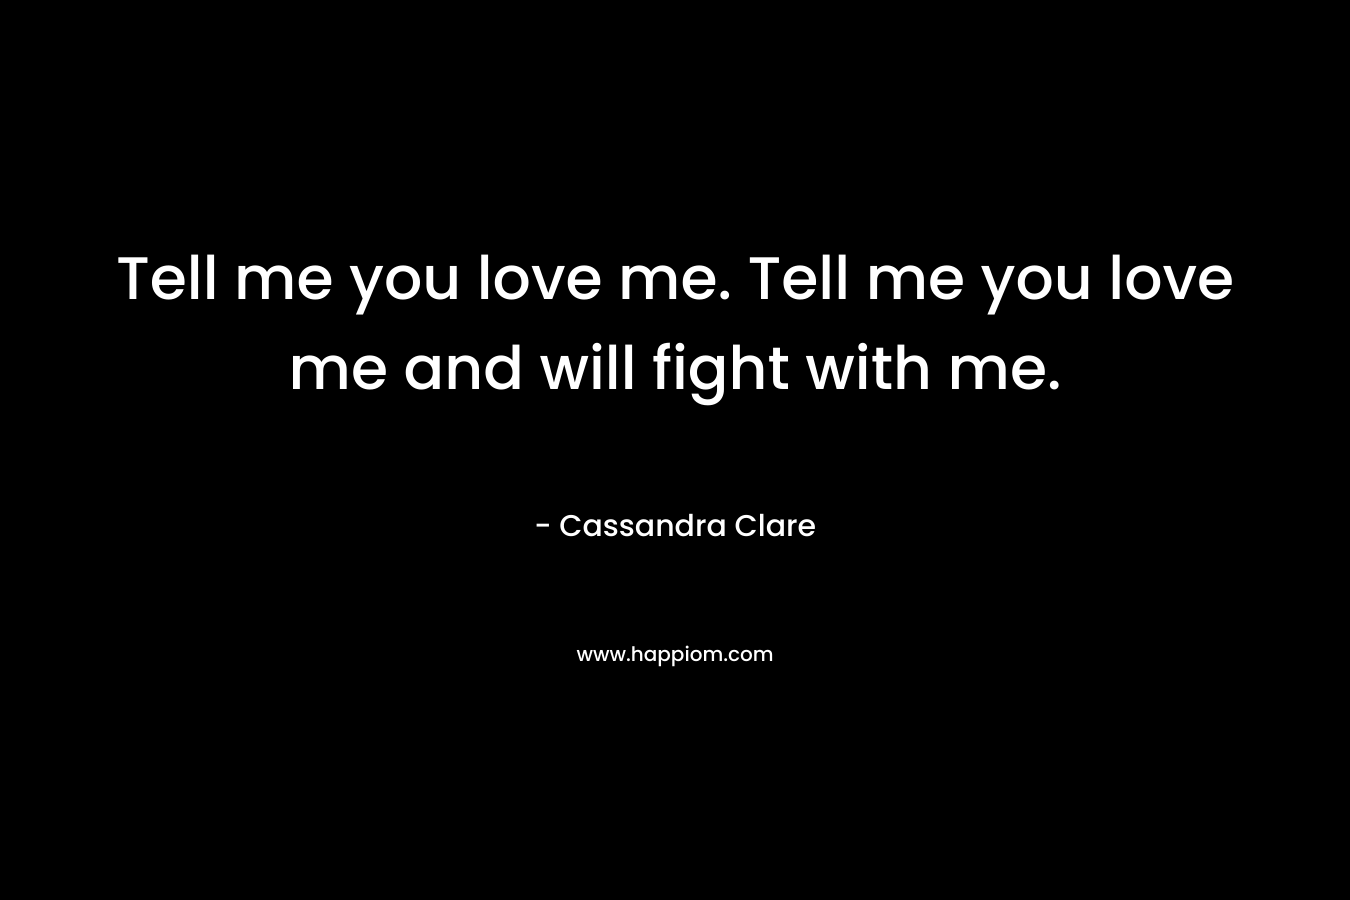 Tell me you love me. Tell me you love me and will fight with me.